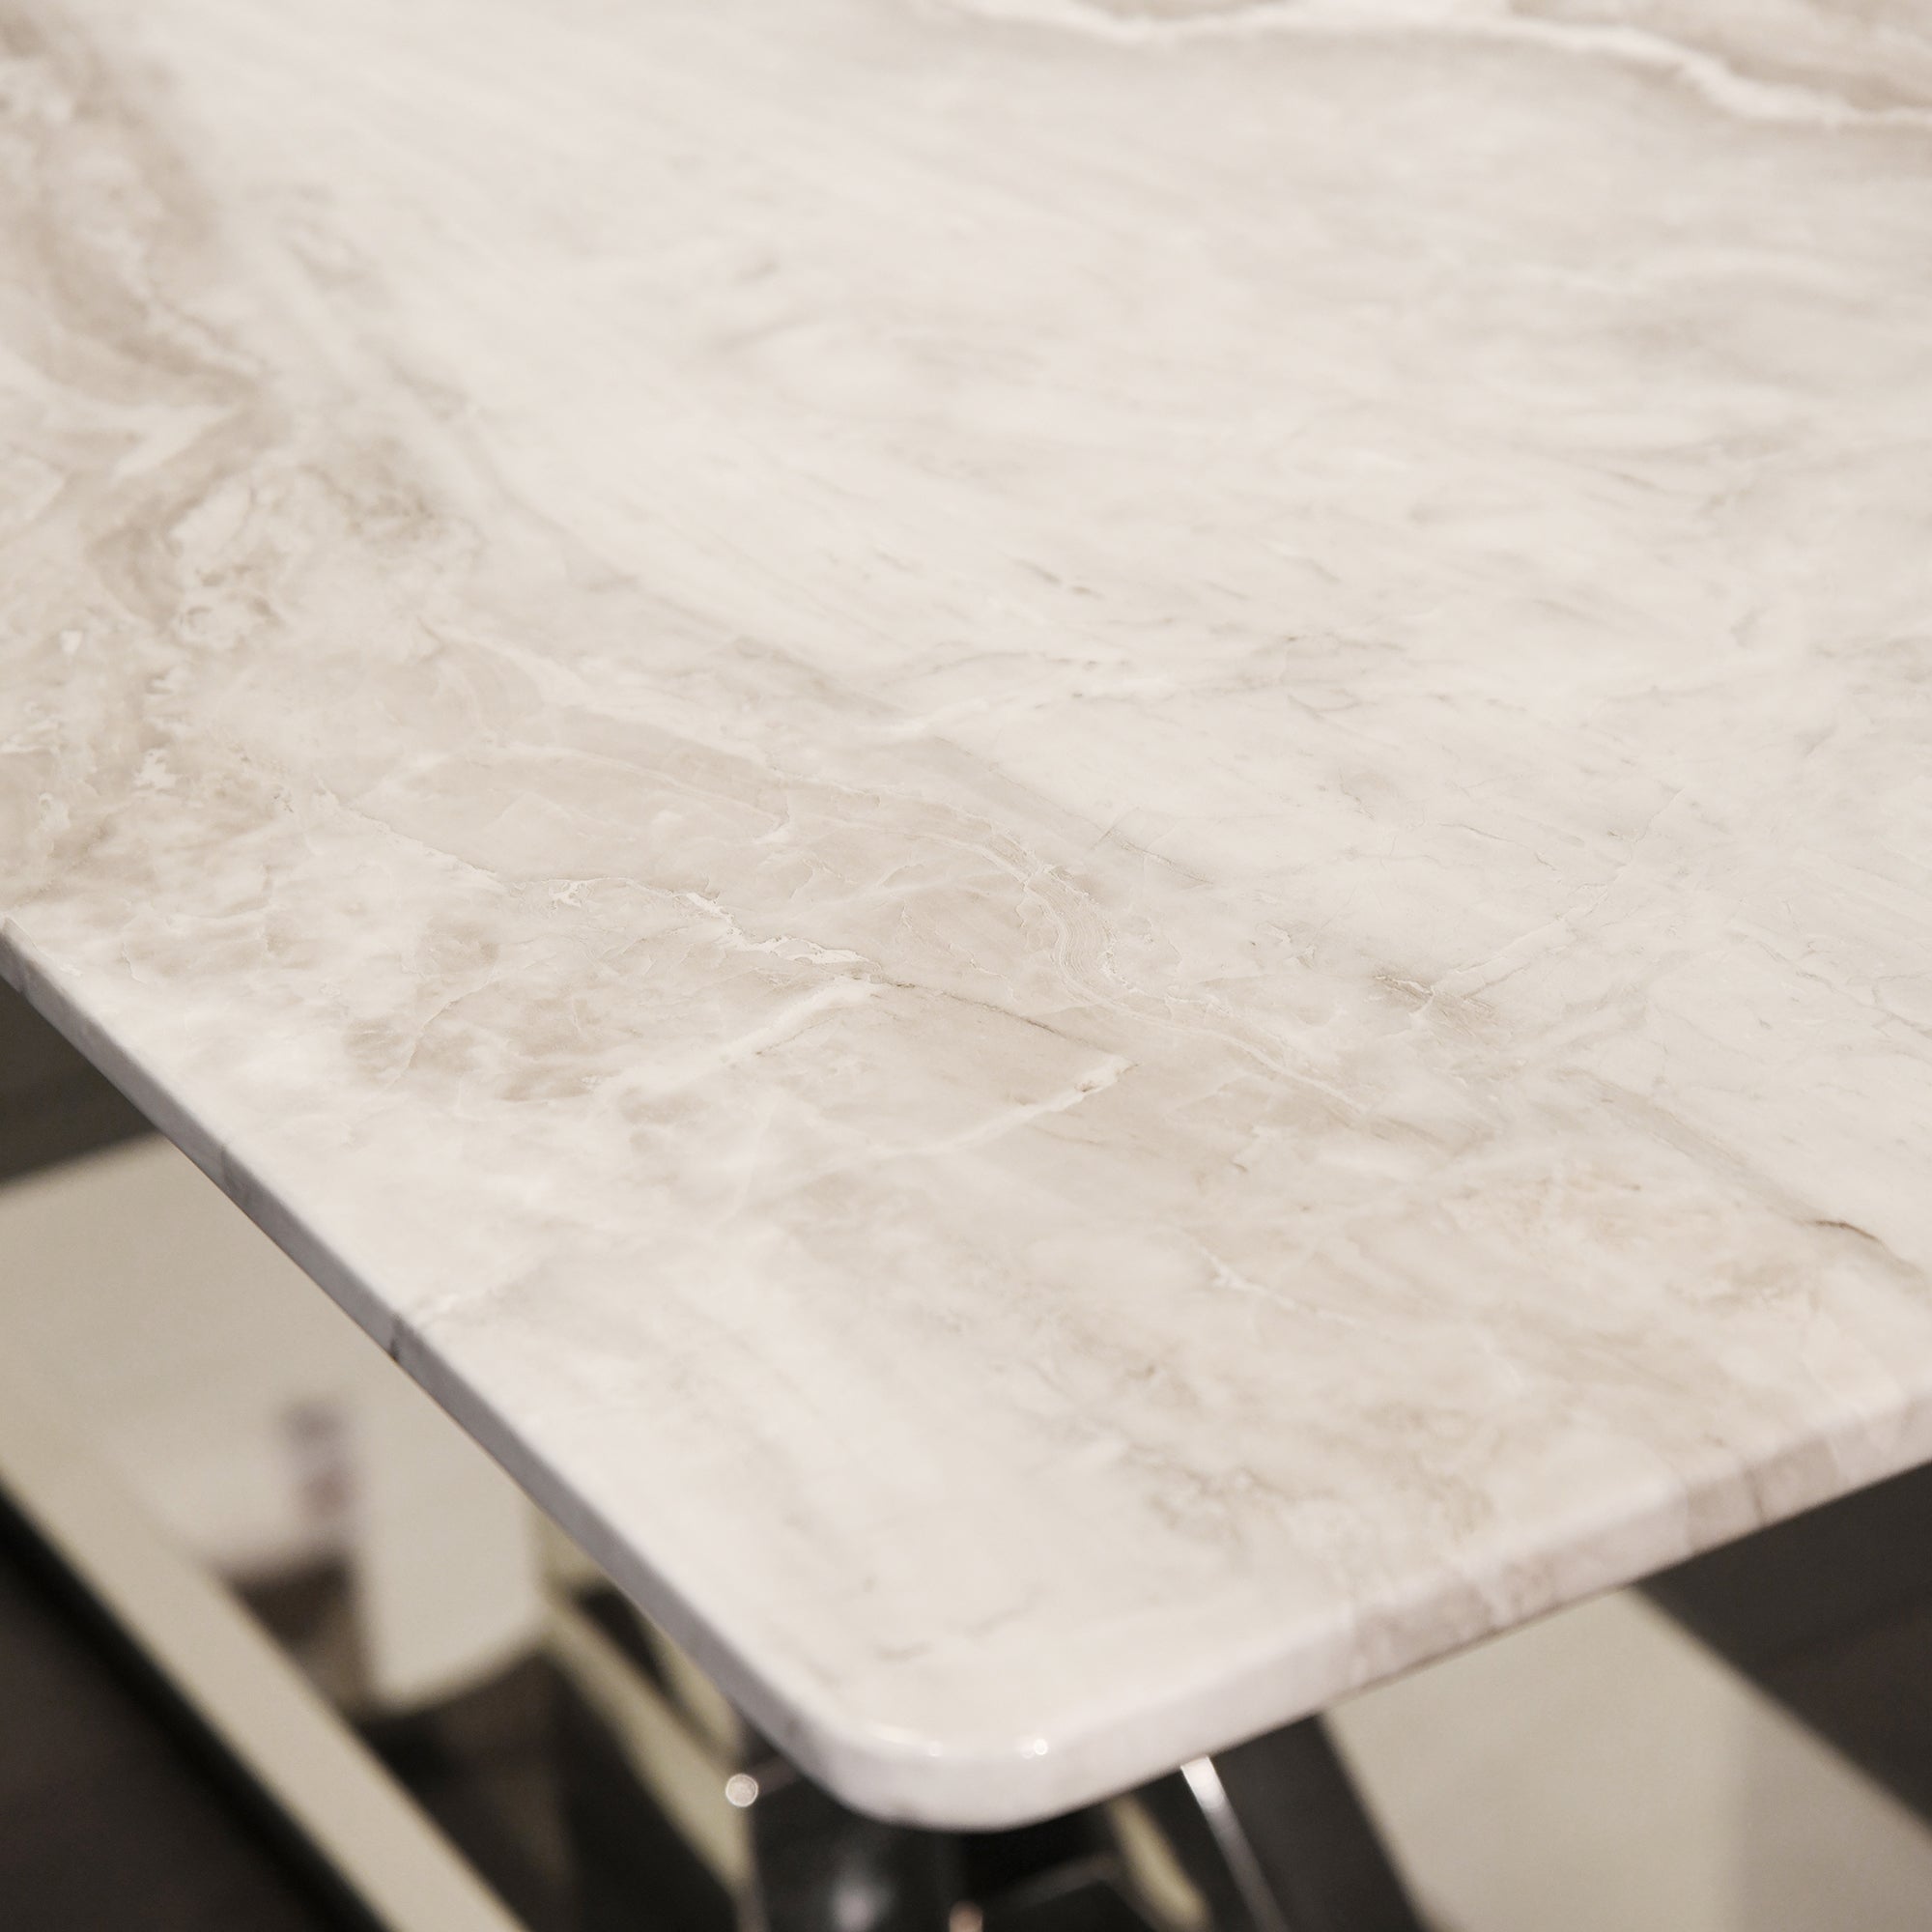 160cm Dining Table Grey Marble Top With Chrome Finish Base